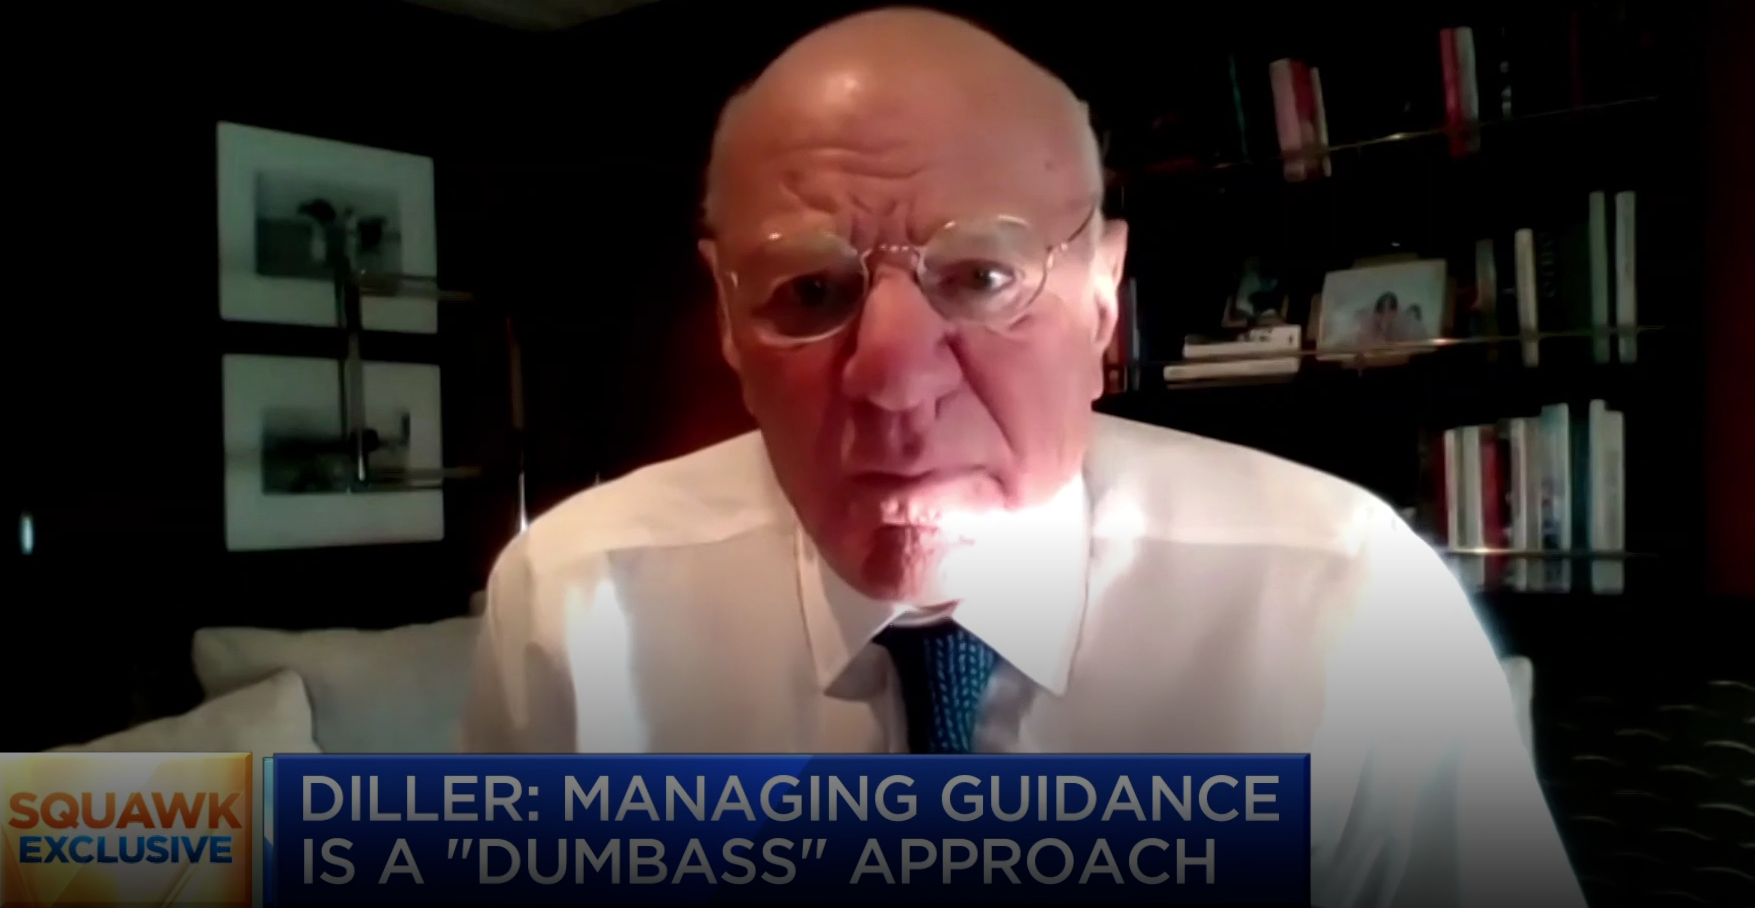 Barry Diller Blasts Corporate Earnings Guidance, Calls It 'Wasteful' Exercise